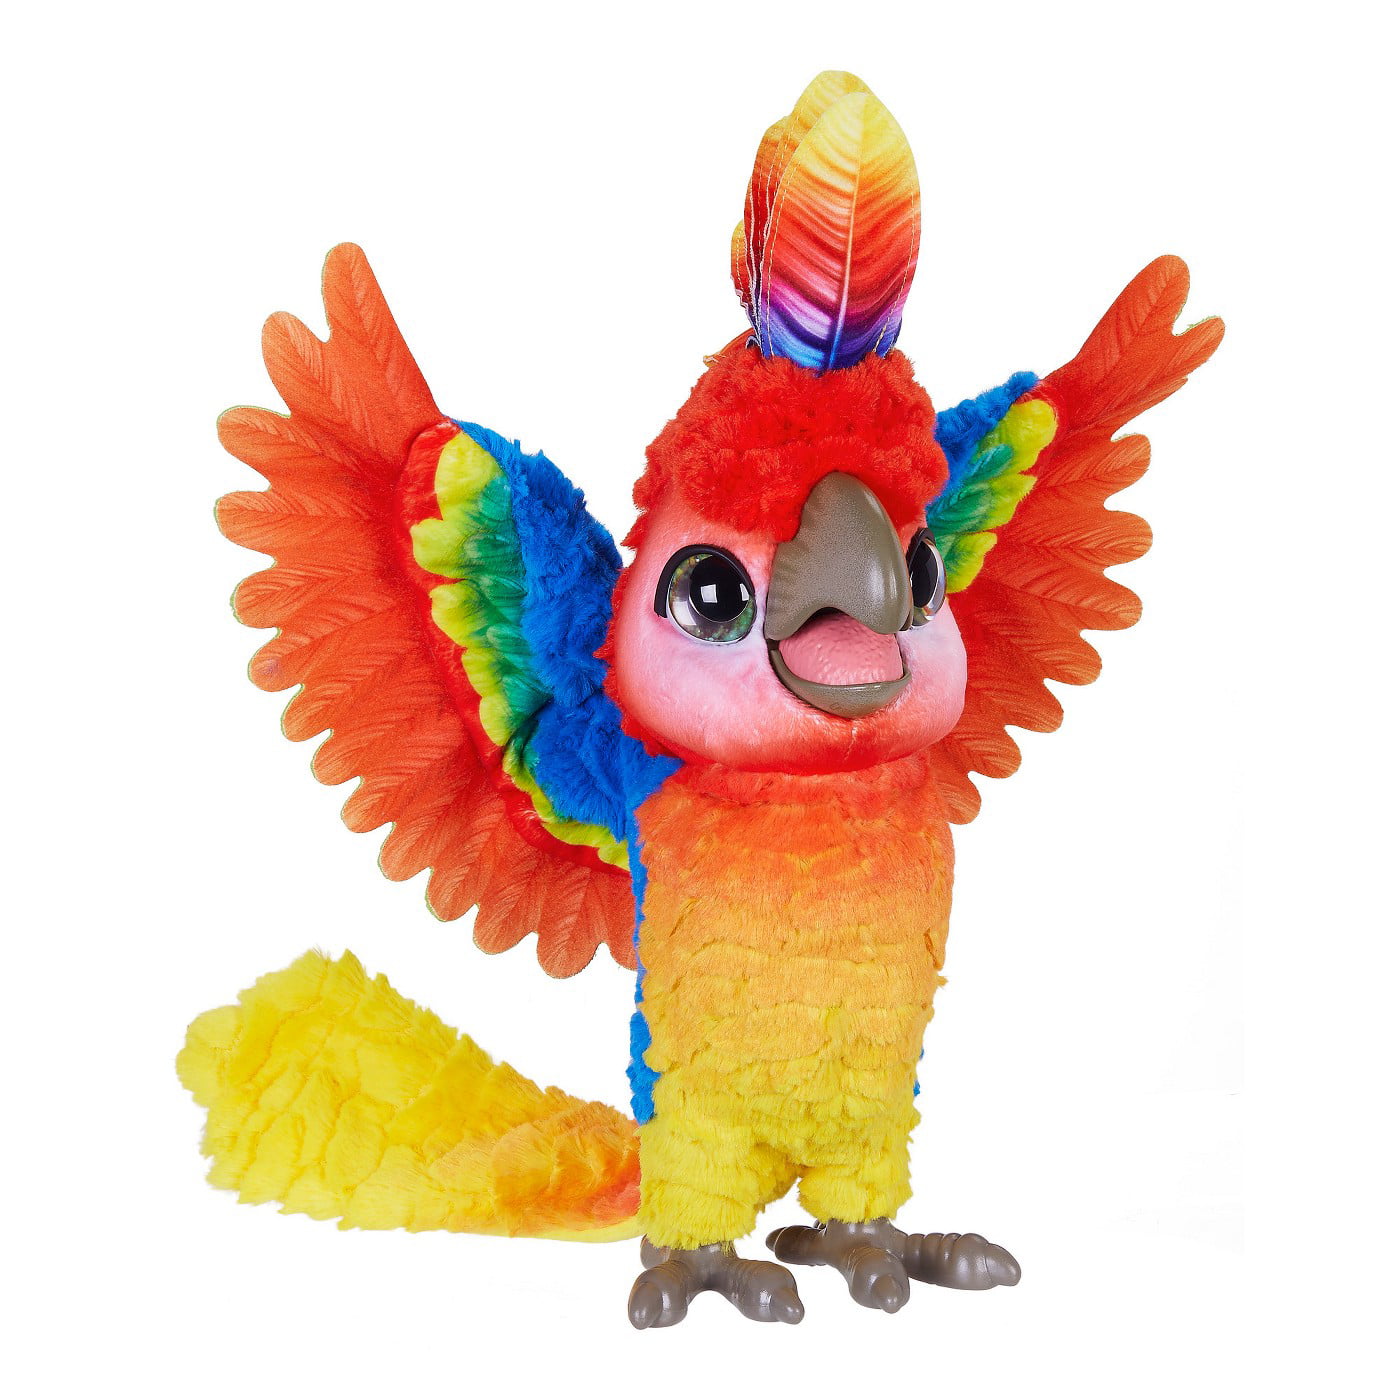 FurReal Rock-a-too The Show Bird Talking Moving Plush Fur Real Parrot Toy Ad3 for sale online 